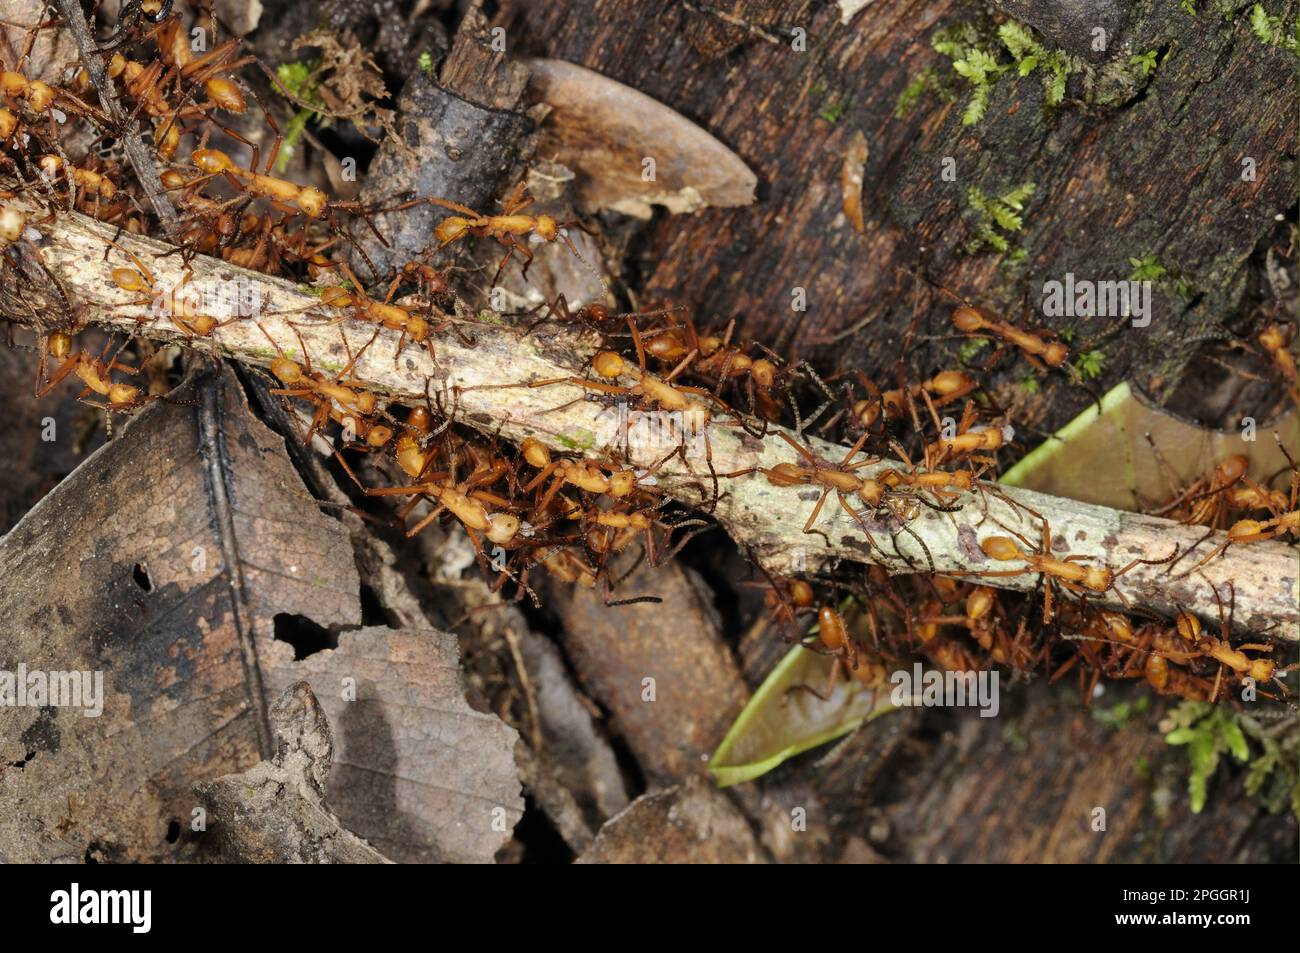 Adult red army ant (Eciton sp.), carrying and moving larvae, during the nomadic phase of colony outmigration, Rupununi, Guyana Stock Photo